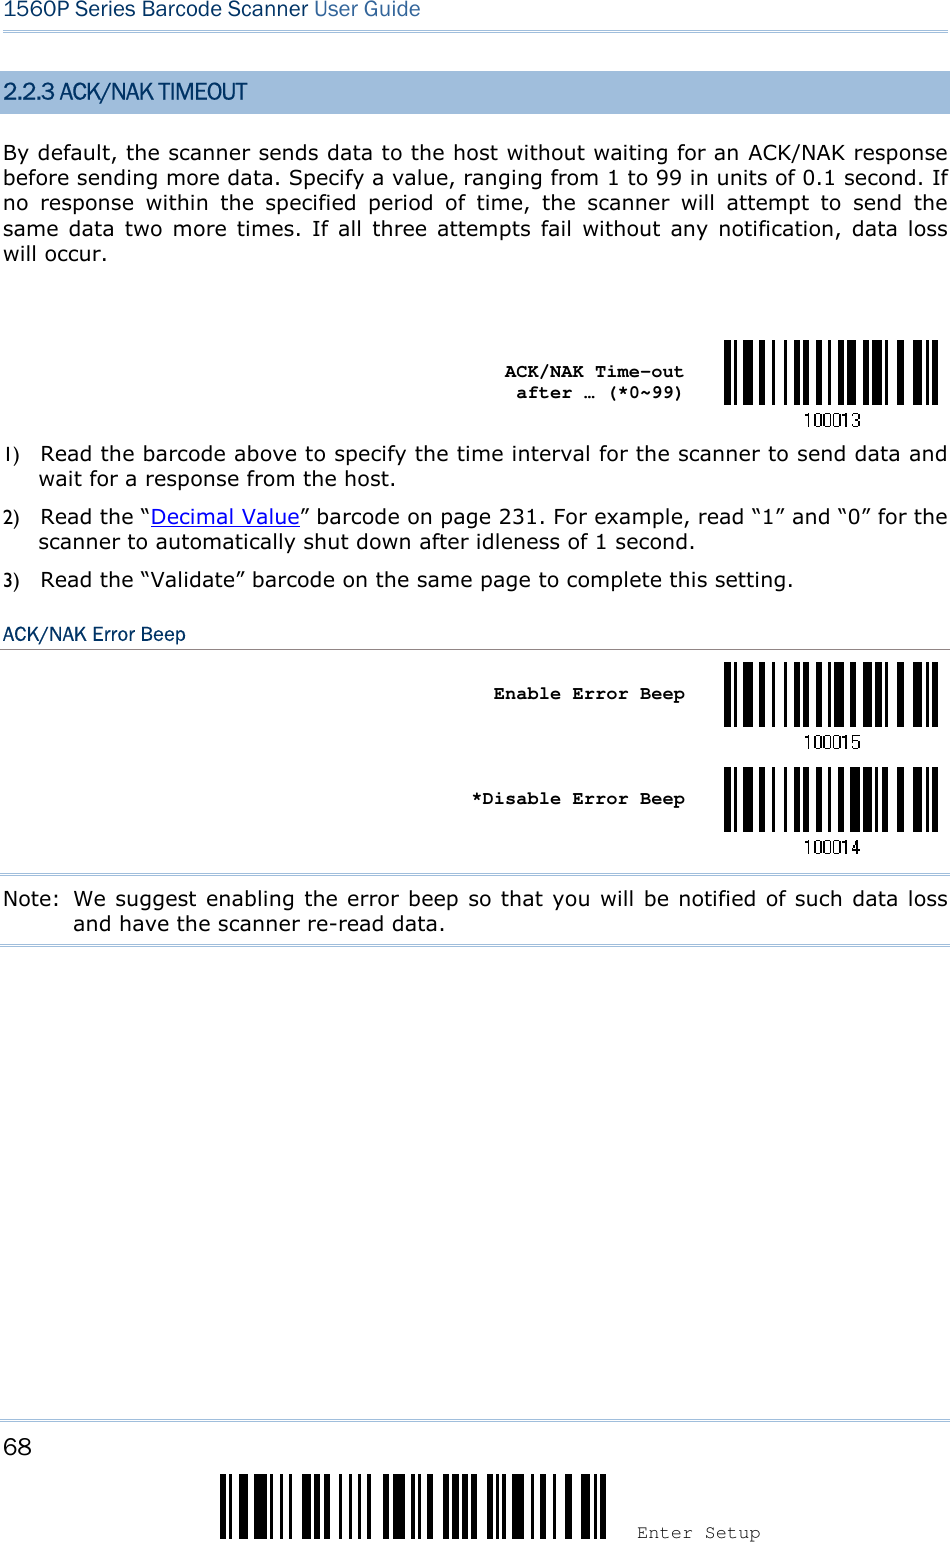 68 Enter Setup 1560P Series Barcode Scanner User Guide 2.2.3 ACK/NAK TIMEOUT By default, the scanner sends data to the host without waiting for an ACK/NAK response before sending more data. Specify a value, ranging from 1 to 99 in units of 0.1 second. If no  response  within  the  specified  period  of  time,  the  scanner  will  attempt  to  send  the same data  two more  times.  If all  three attempts  fail  without  any  notification,  data loss will occur. ACK/NAK Time-out after … (*0~99) 1) Read the barcode above to specify the time interval for the scanner to send data andwait for a response from the host.2) Read the “Decimal Value” barcode on page 231. For example, read “1” and “0” for thescanner to automatically shut down after idleness of 1 second.3) Read the “Validate” barcode on the same page to complete this setting.ACK/NAK Error Beep Enable Error Beep *Disable Error BeepNote:  We suggest enabling the error beep so that you will be notified of such data loss and have the scanner re-read data. 